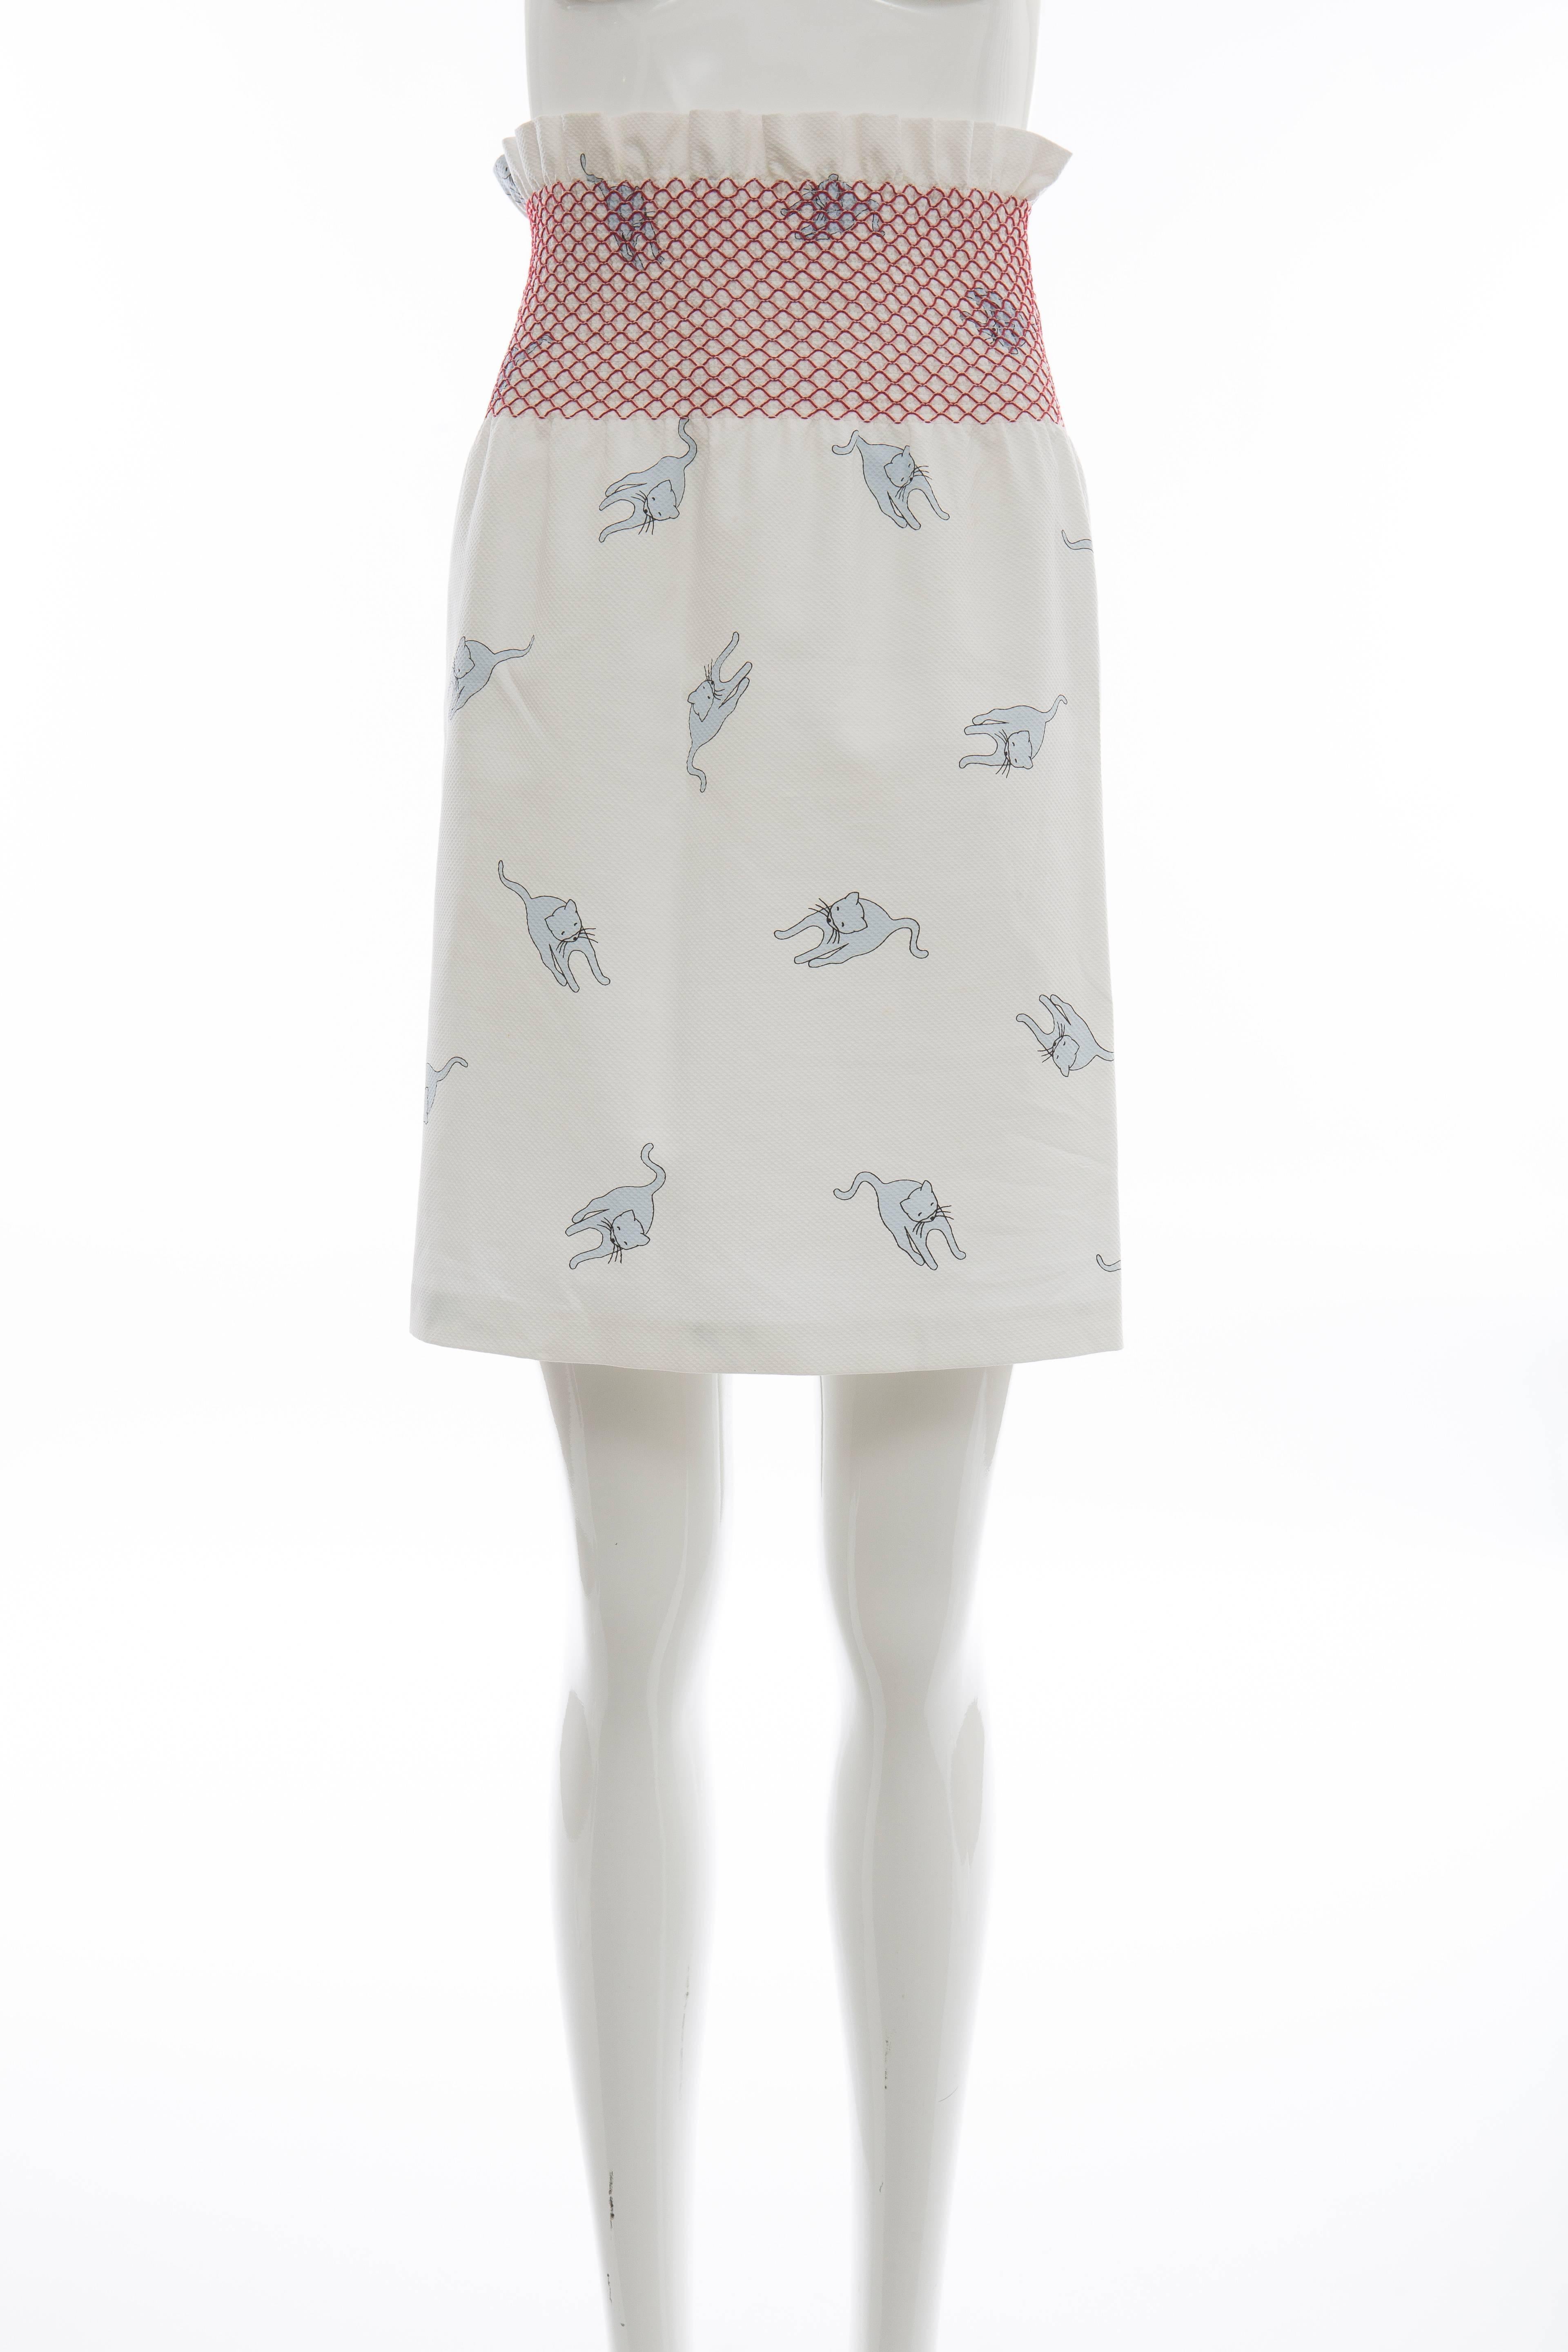 Miu Miu, Spring-Summer 2010, cotton skirt with cat print throughout and red smocked waistband.

IT.38
US. 2

Waist: 24